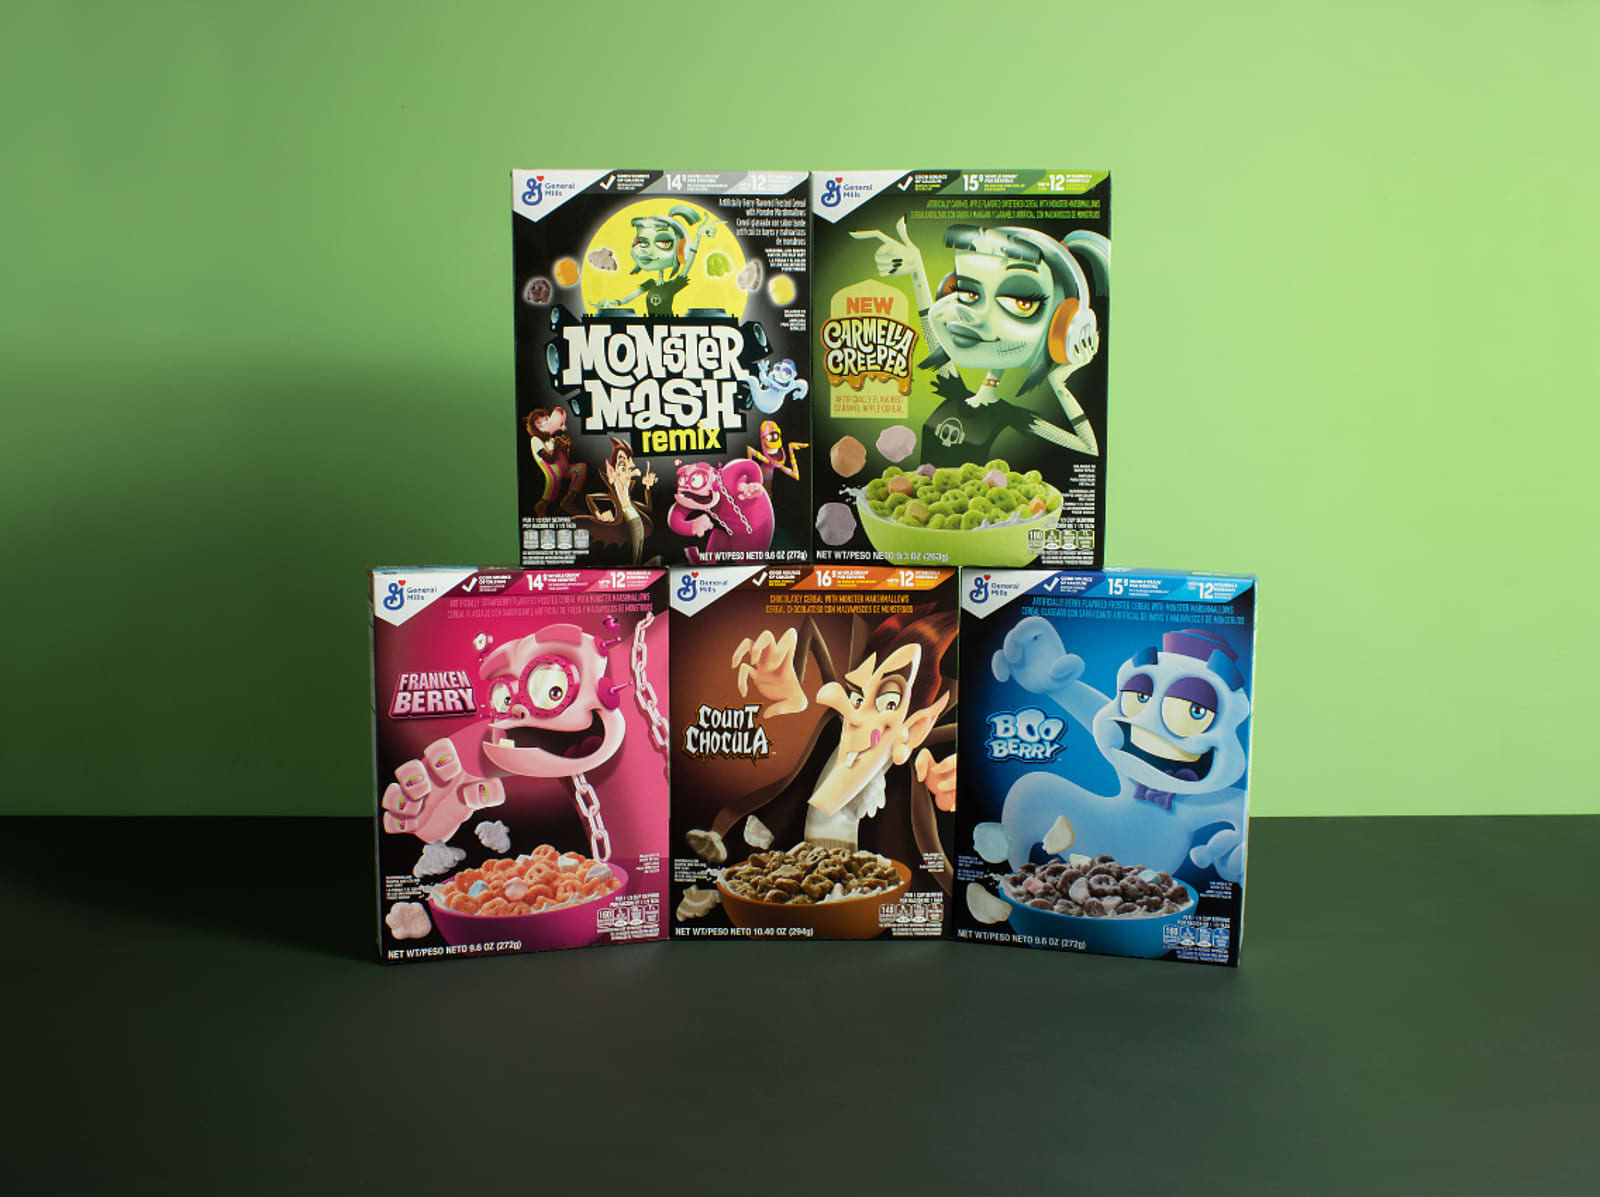 Five Monsters Cereal boxes: Boo Berry, Frankenberry, Count Chocula, Carmella Creepr and the Monster Mash Remix